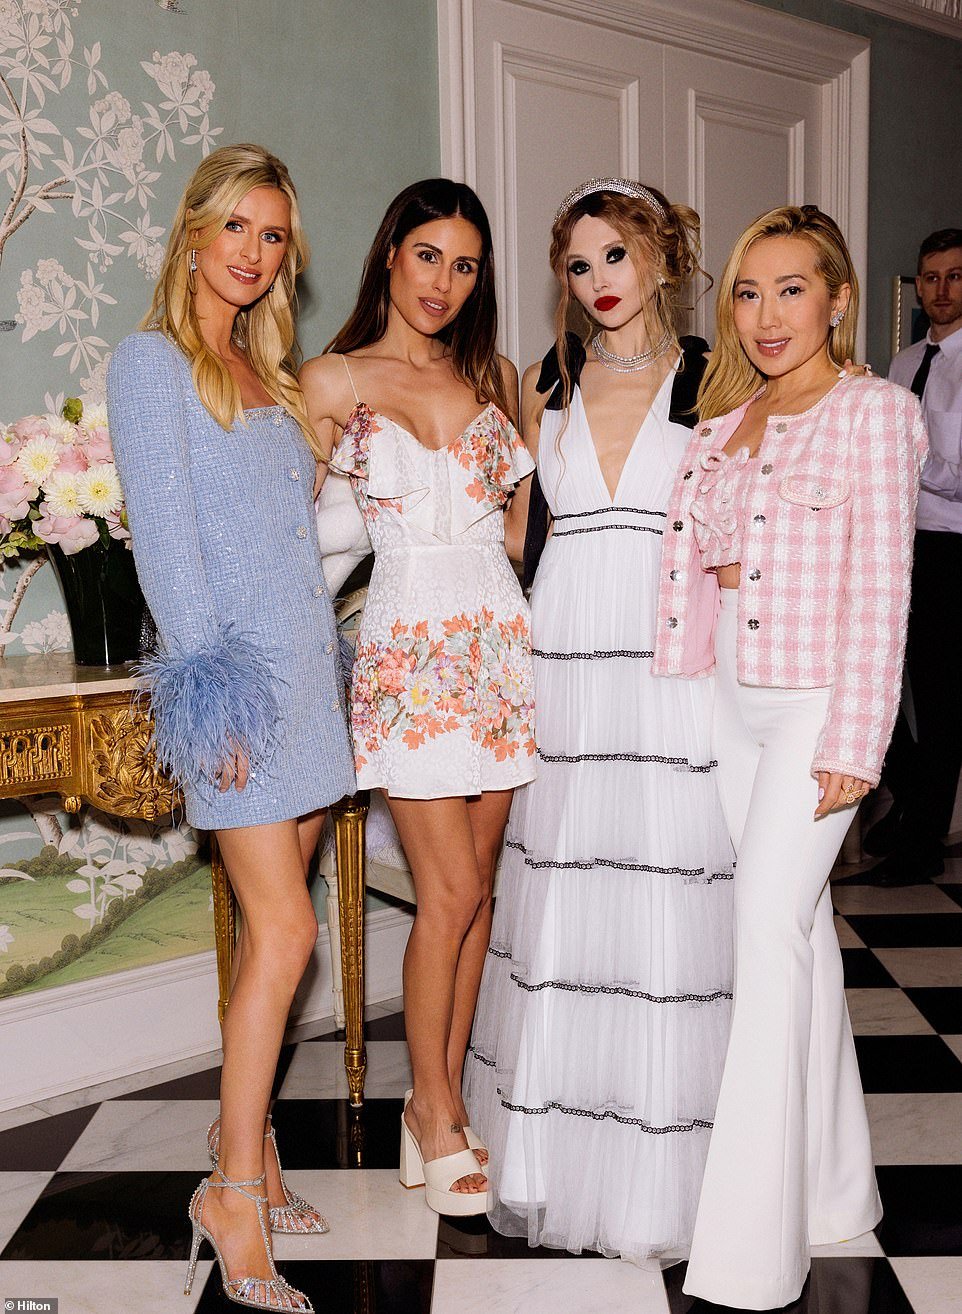 Nicky was seen on the far left with Stacey Bendet (in the headband), a fashion designer, founder, CEO and creative director of Alice + Olivia, a contemporary clothing company based in New York City.  Also featured were Sarah Howard and U Beauty founder Tina Craig